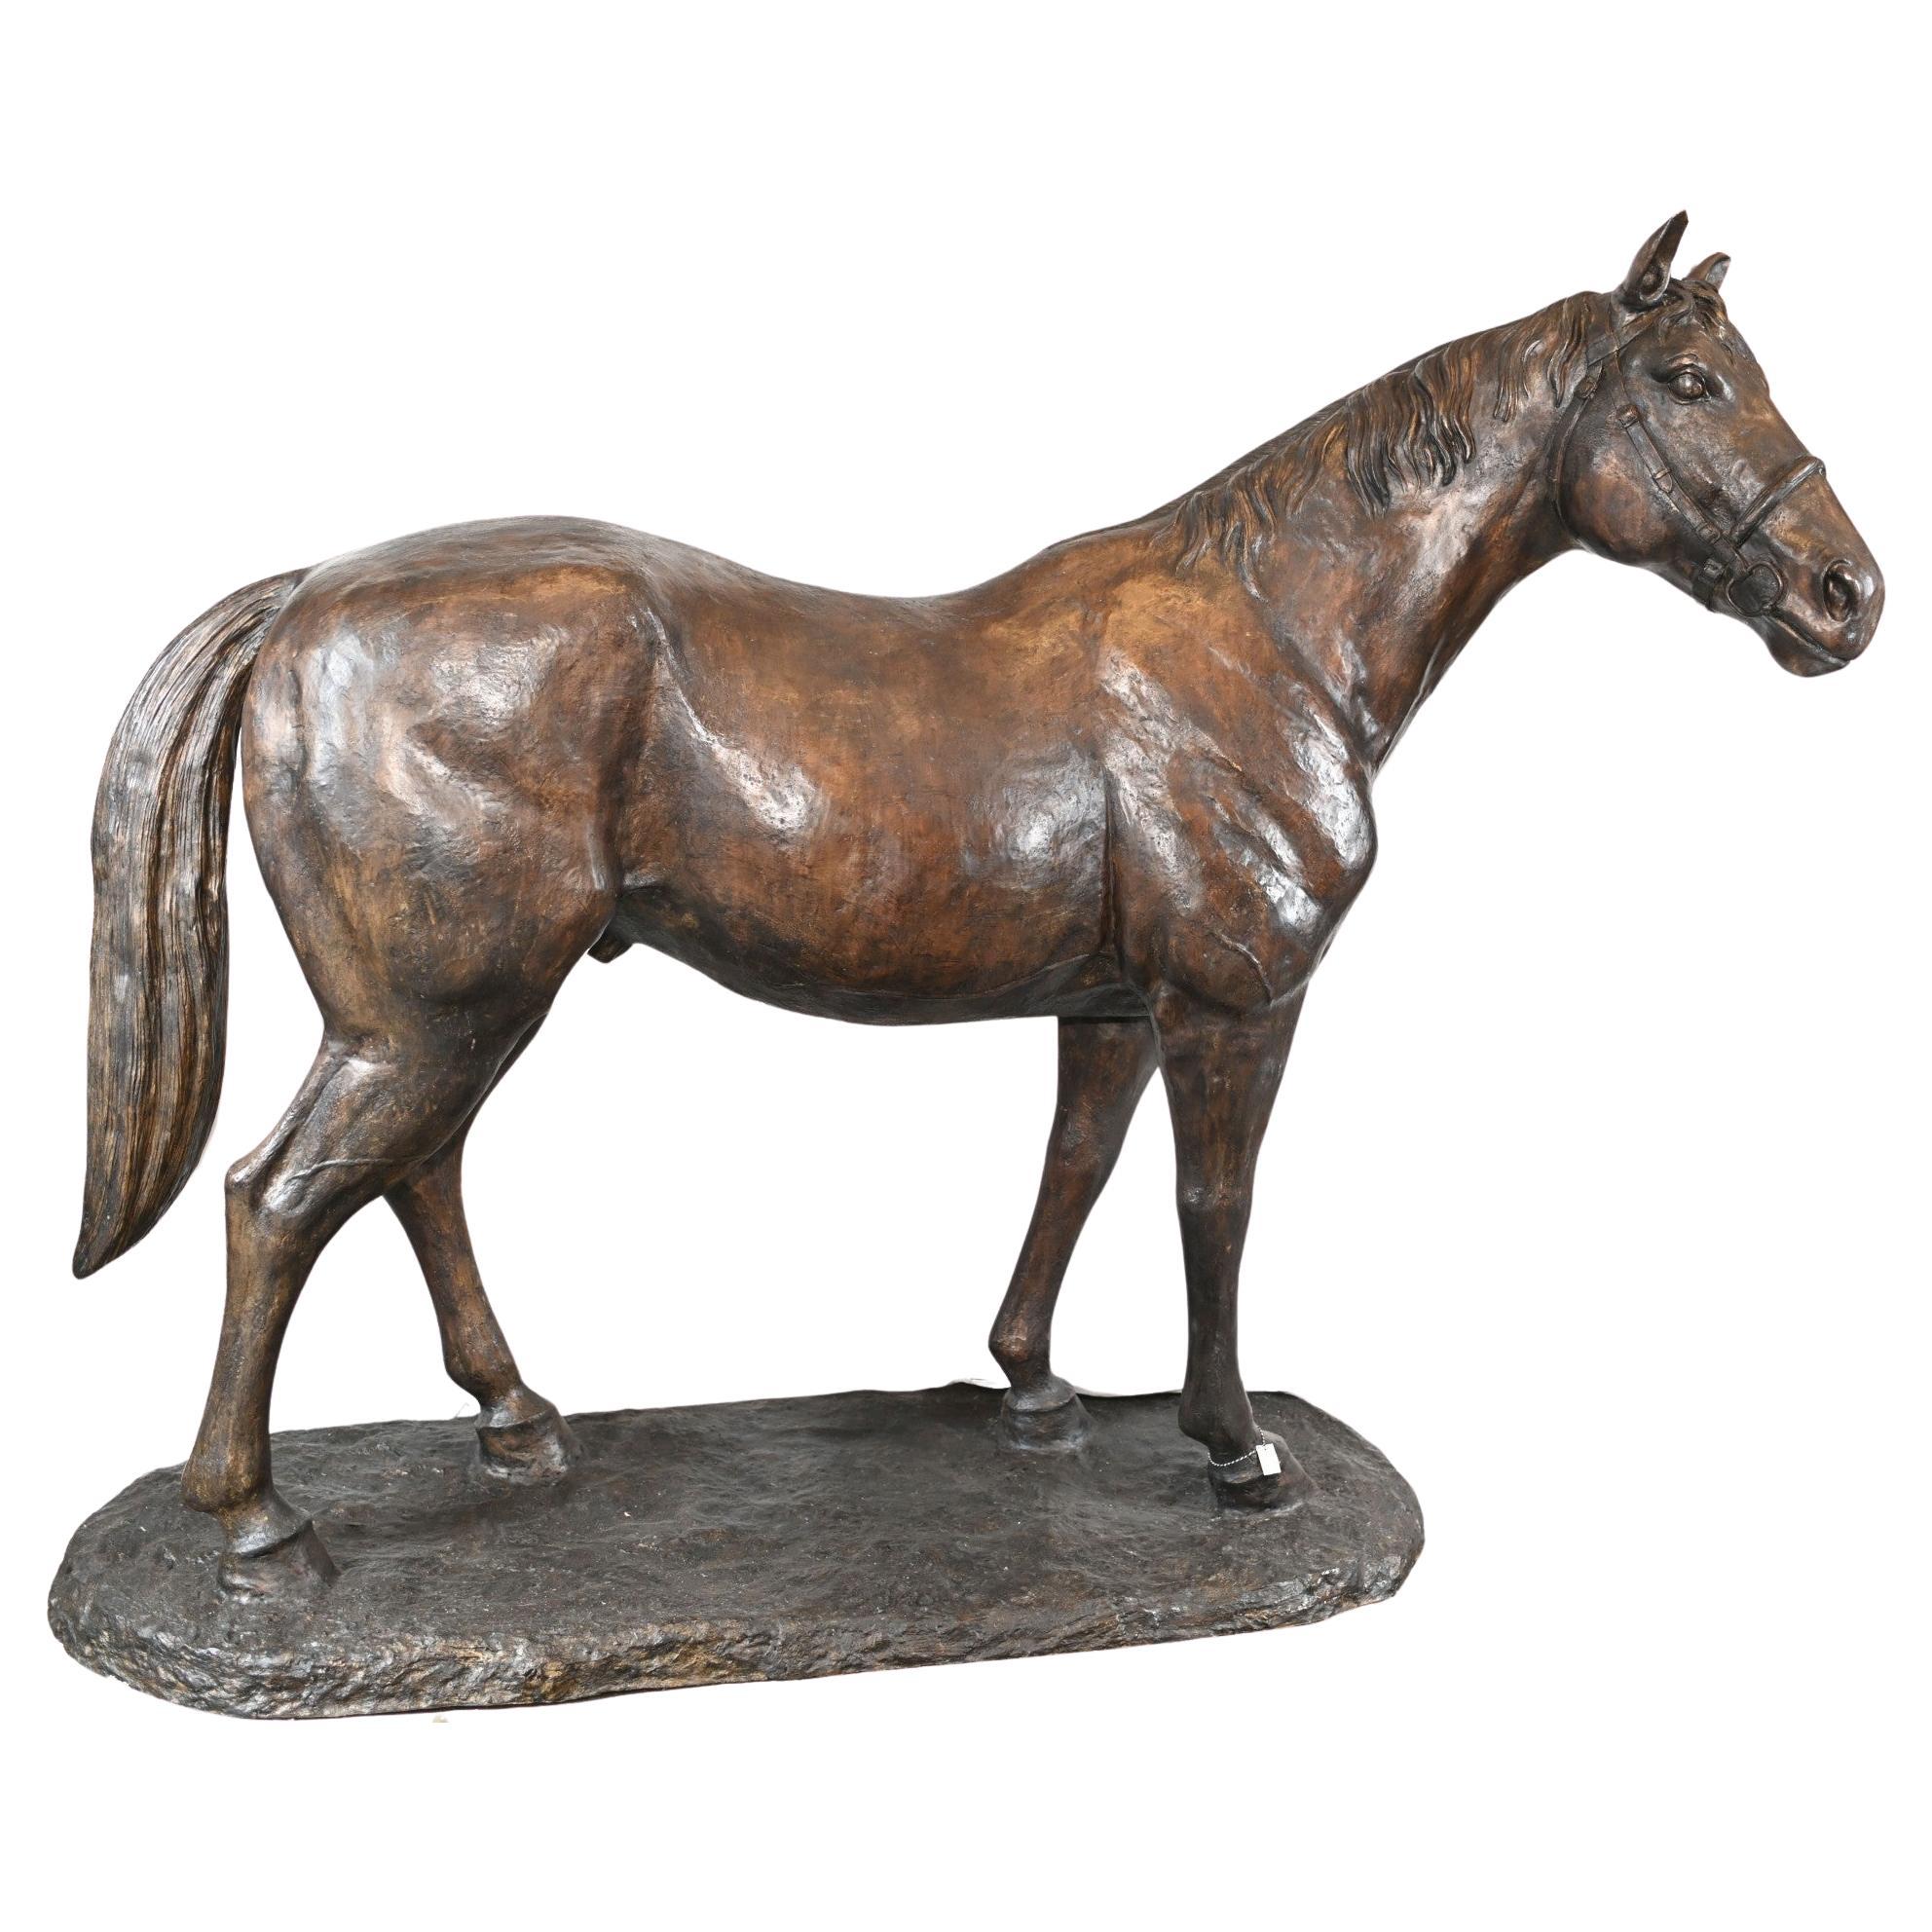 Lifesize French Bronze Horse Statue Architectural Bronze Horses Pony For Sale